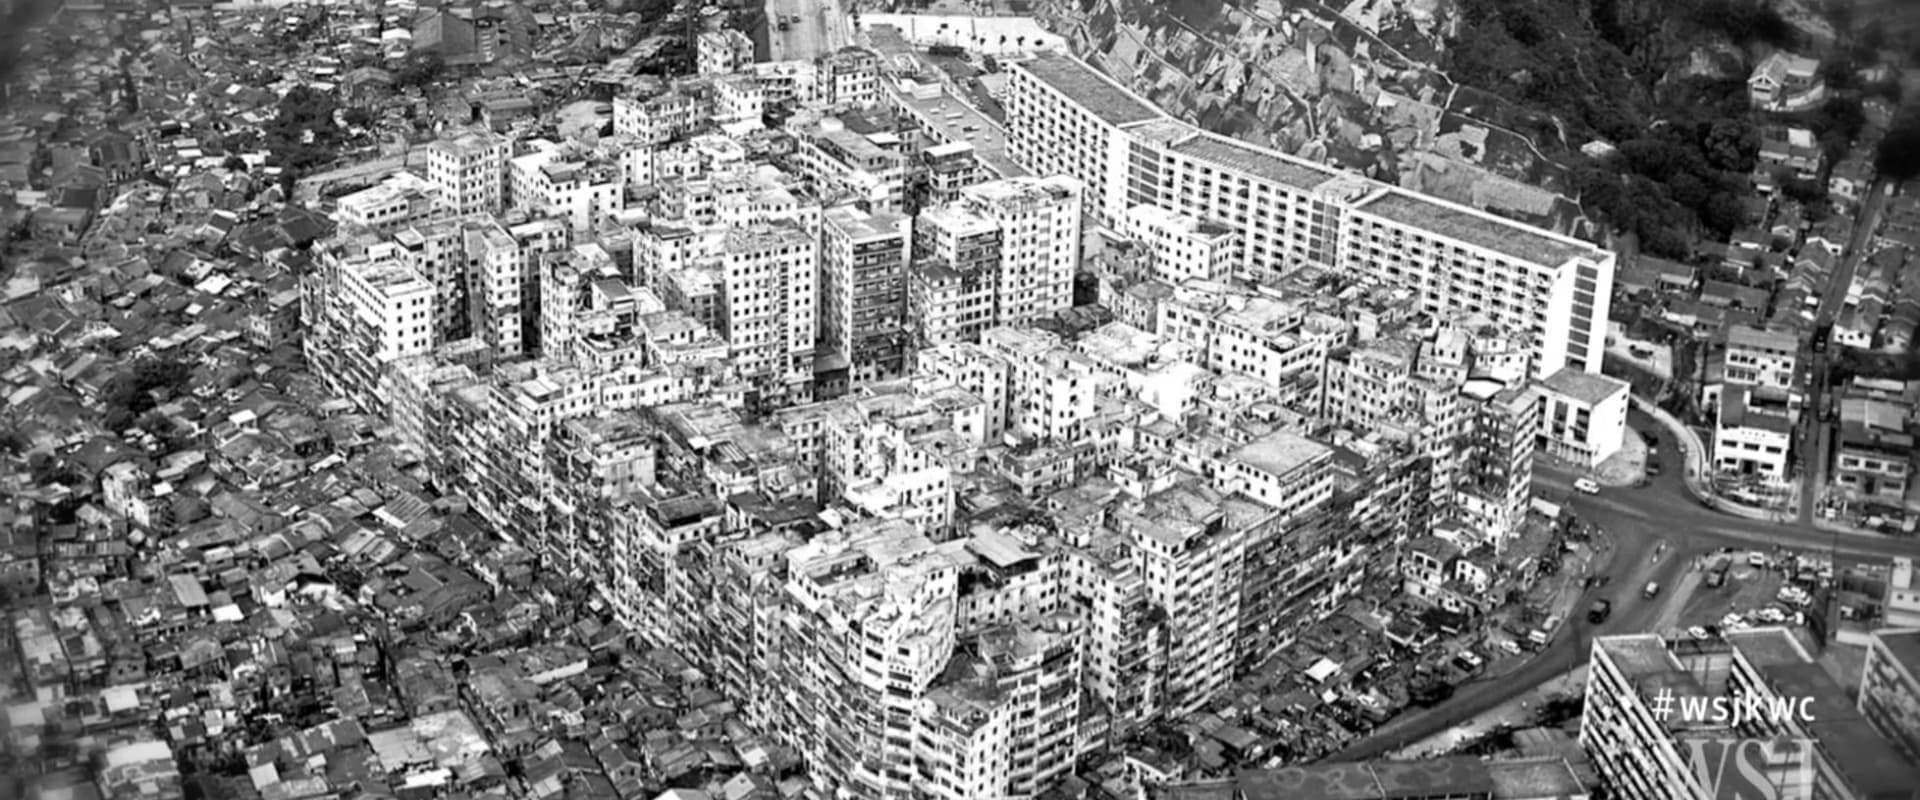 City of Imagination: Kowloon Walled City 20 Years Later